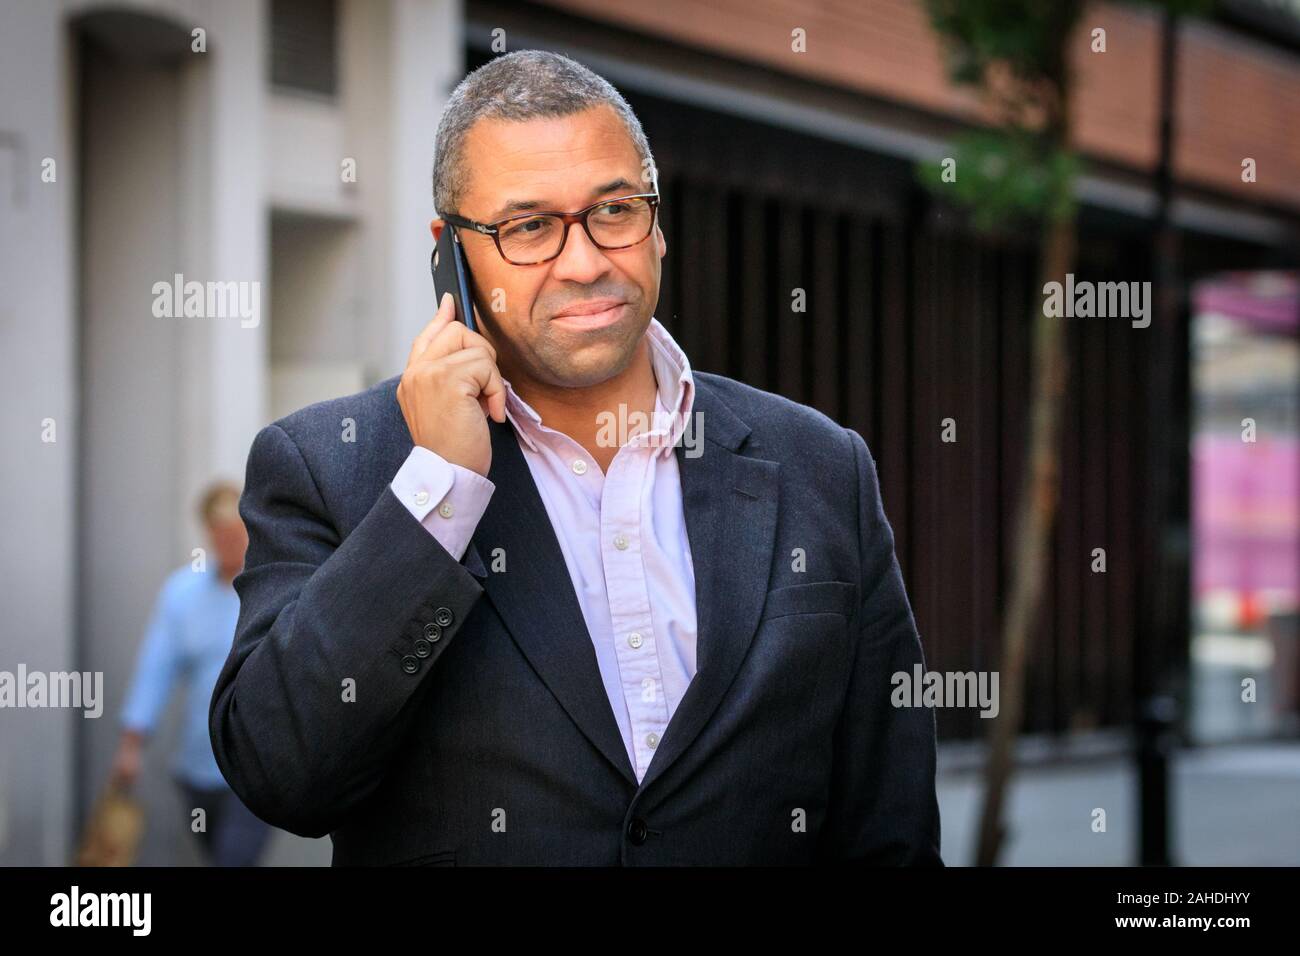 James Cleverly, Conservative Party Chairman, British Tory politician, exterior close up portrait in Westminster, close up, London, UK Stock Photo